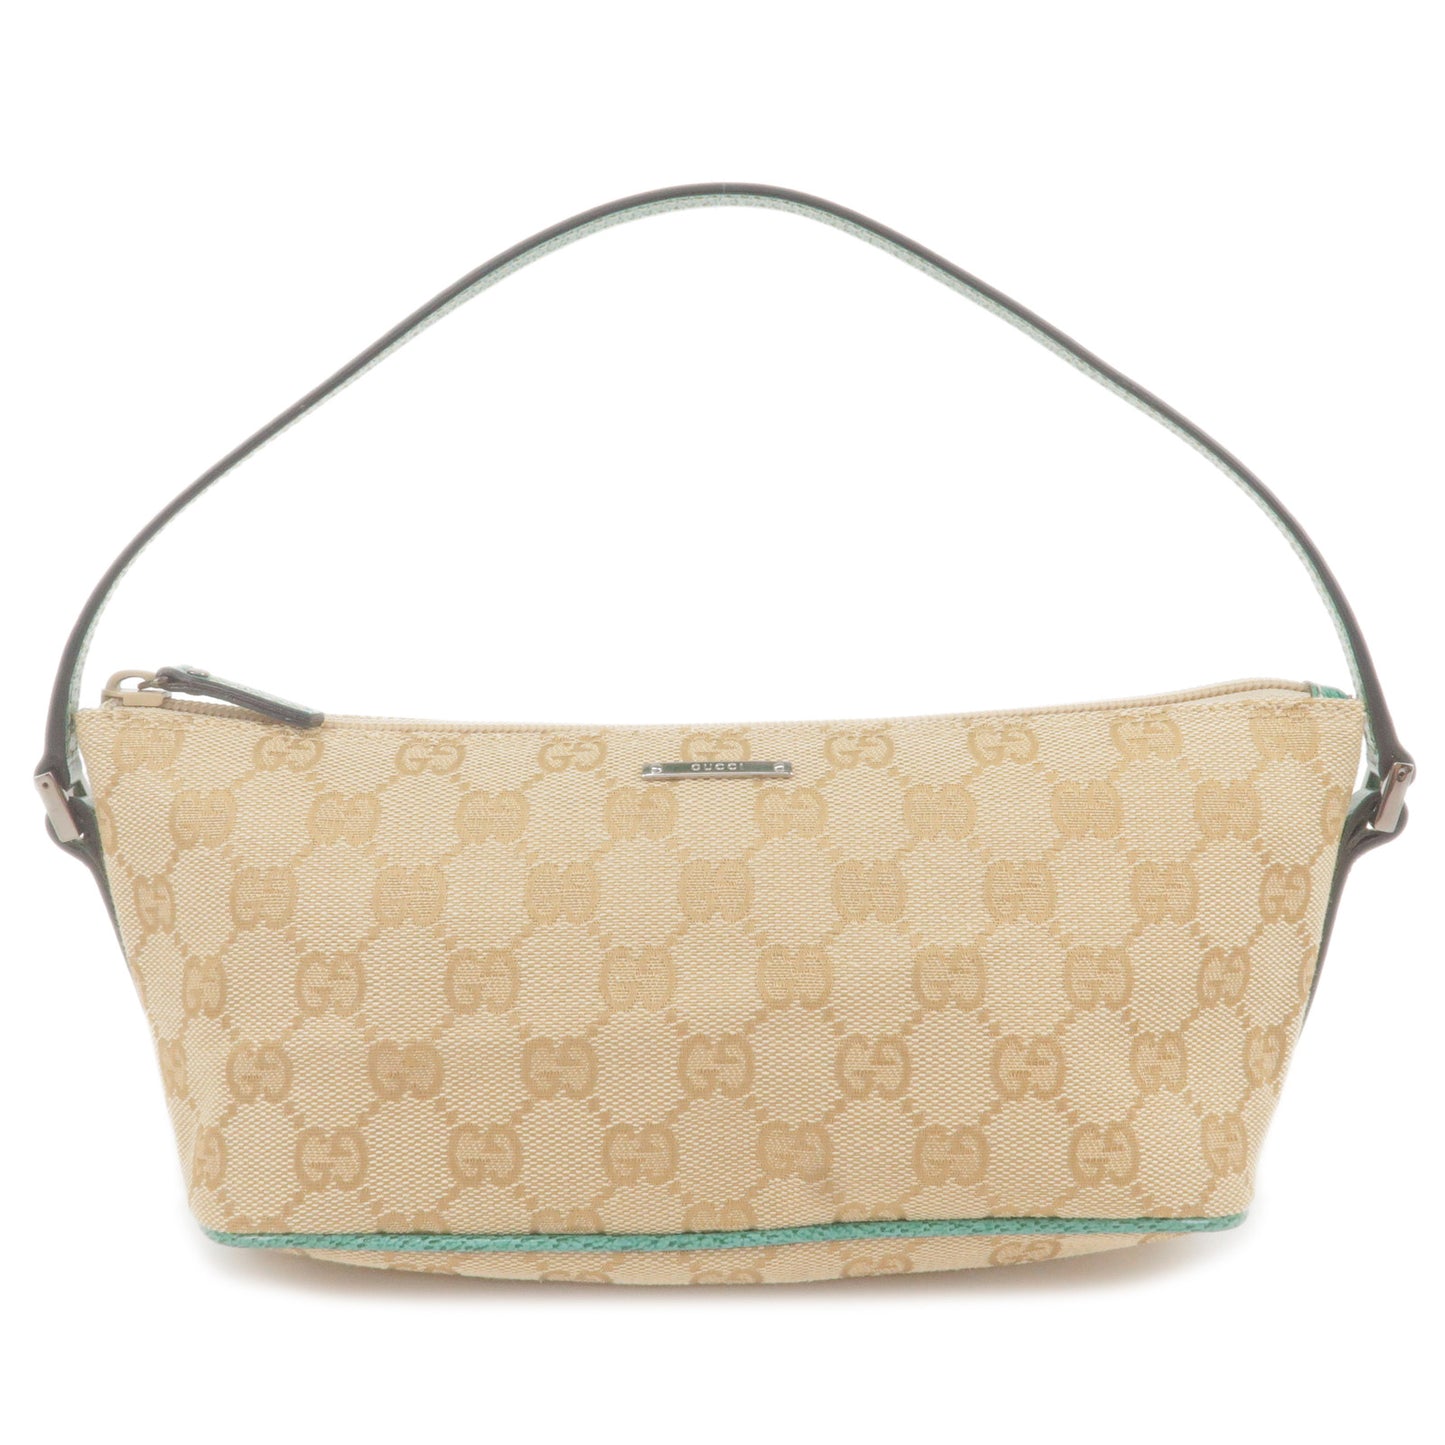 GUCCI-Boat-Bag-GG-Canvas-Leather-Hand-Bag-Beige-07198